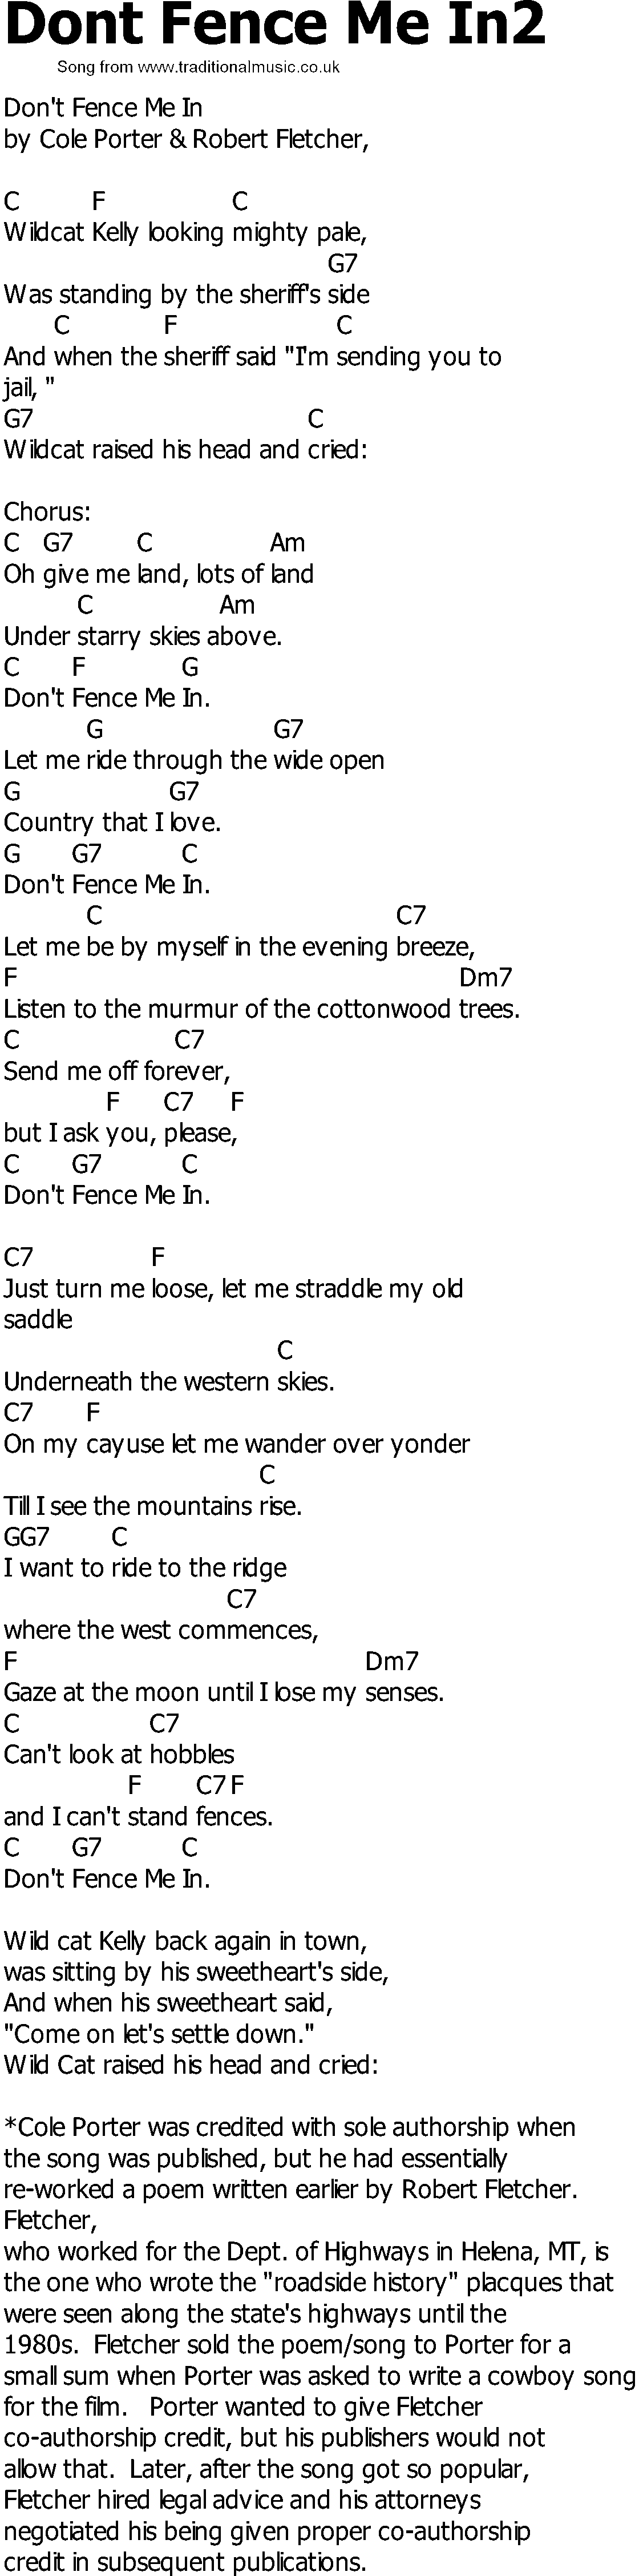 Old Country song lyrics with chords - Dont Fence Me In2